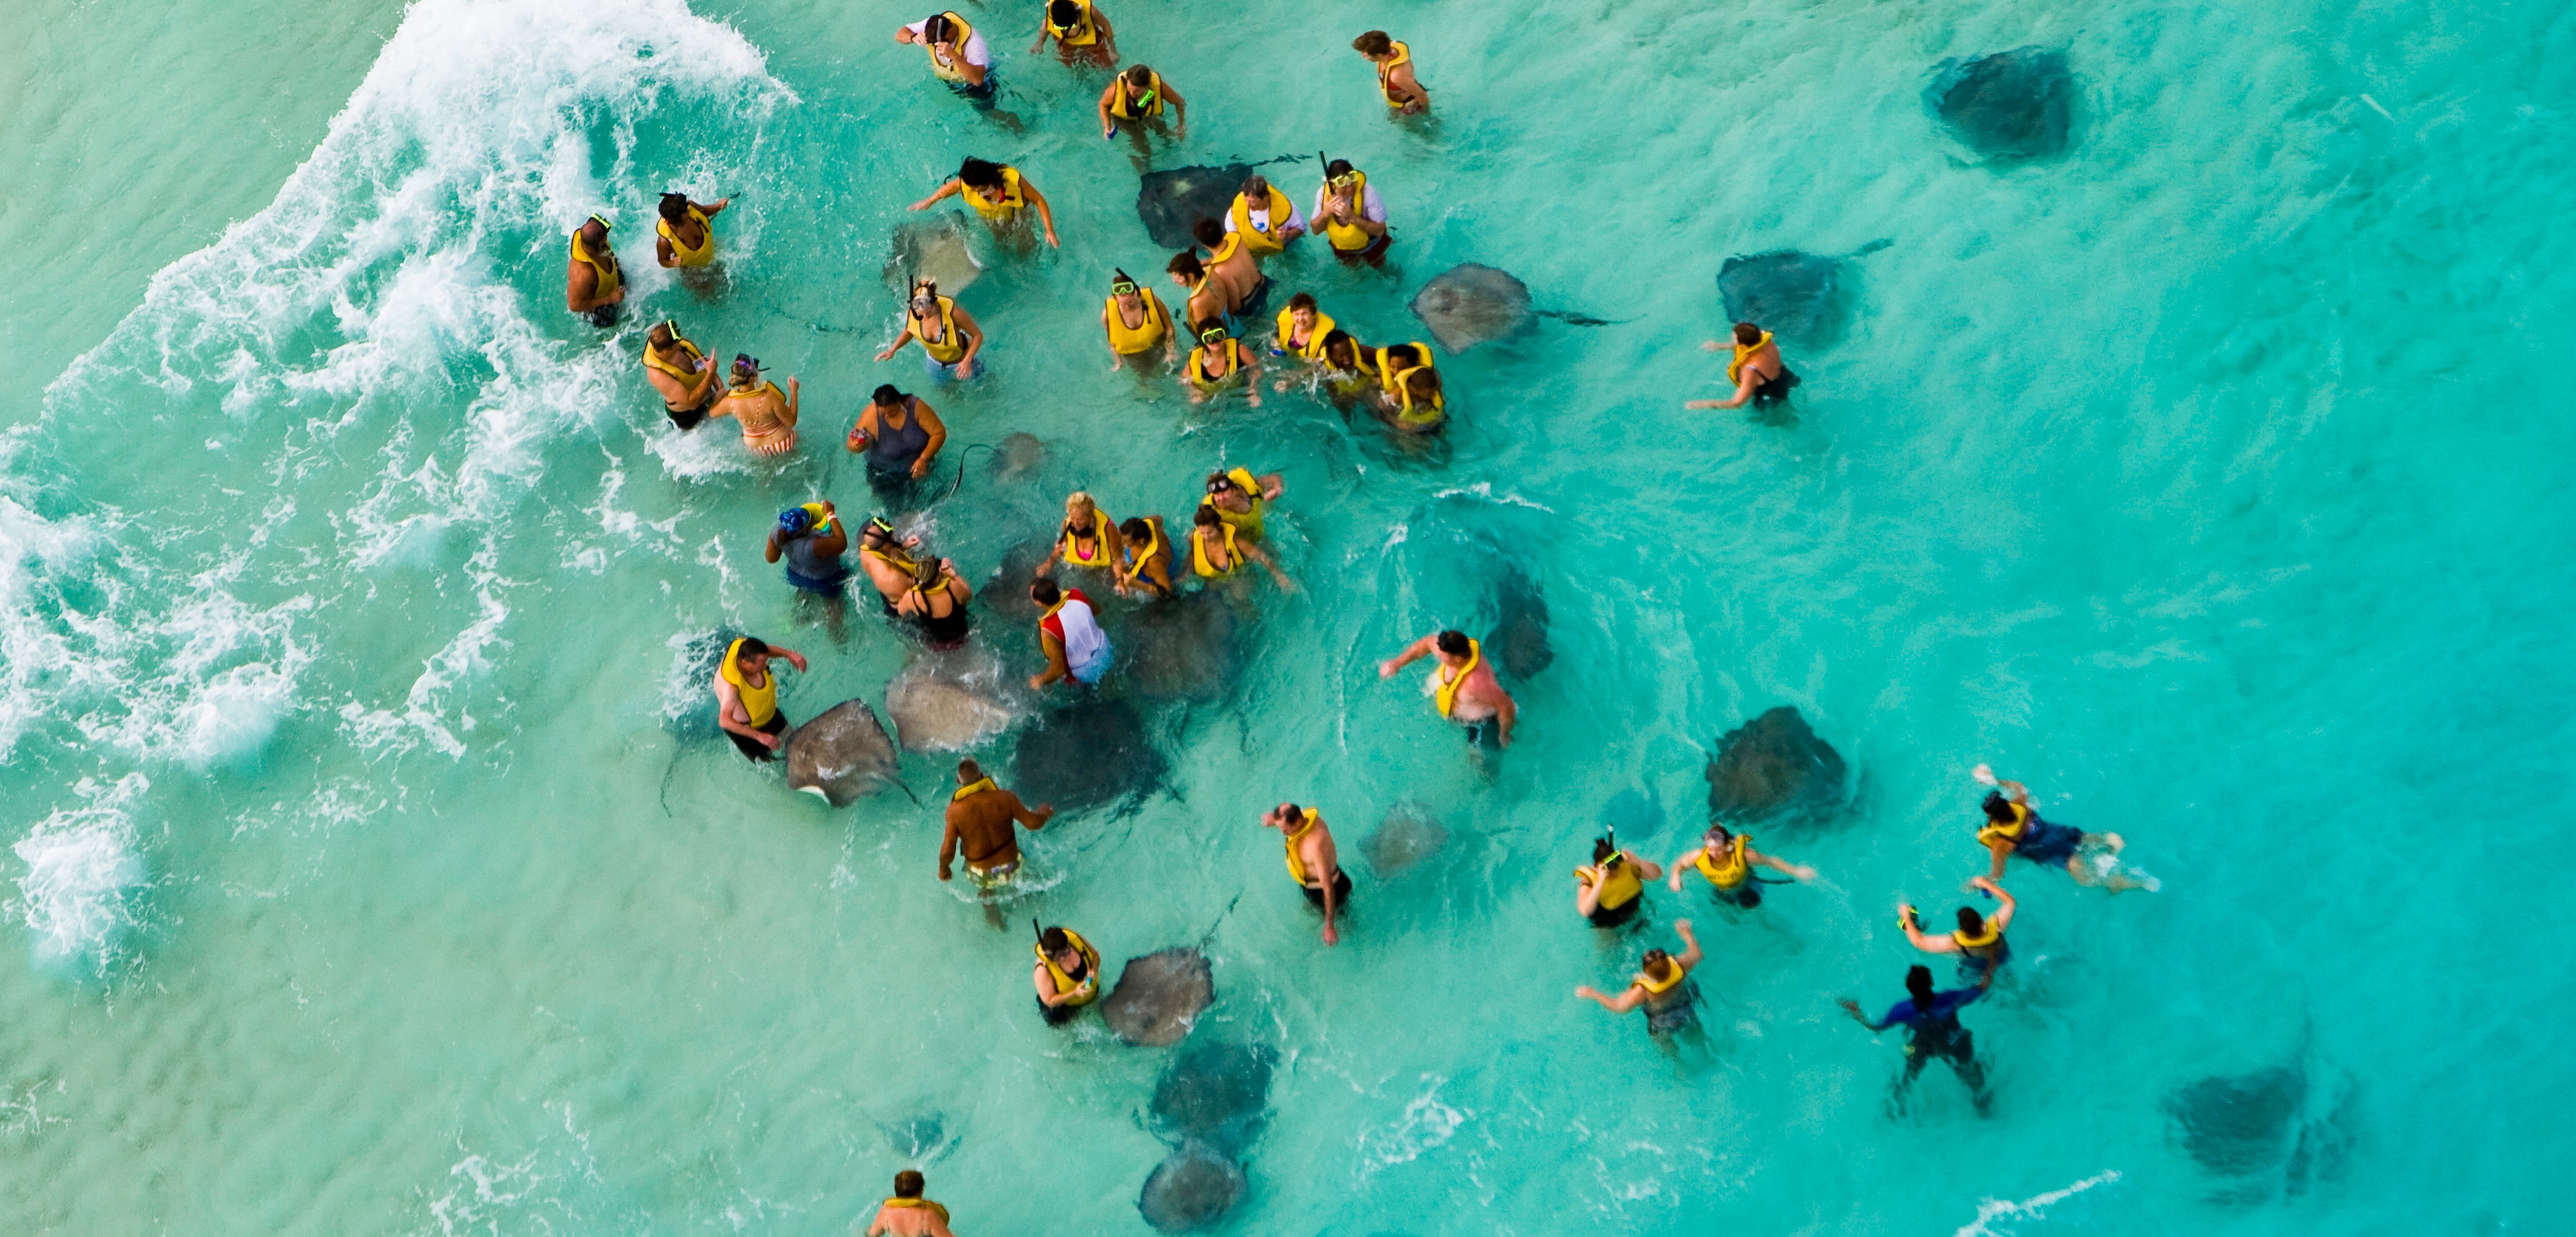 Nearly 800,000 people feed stingrays off Grand Cayman Island each year. Photo by Laurie Chamberlain/Corbis